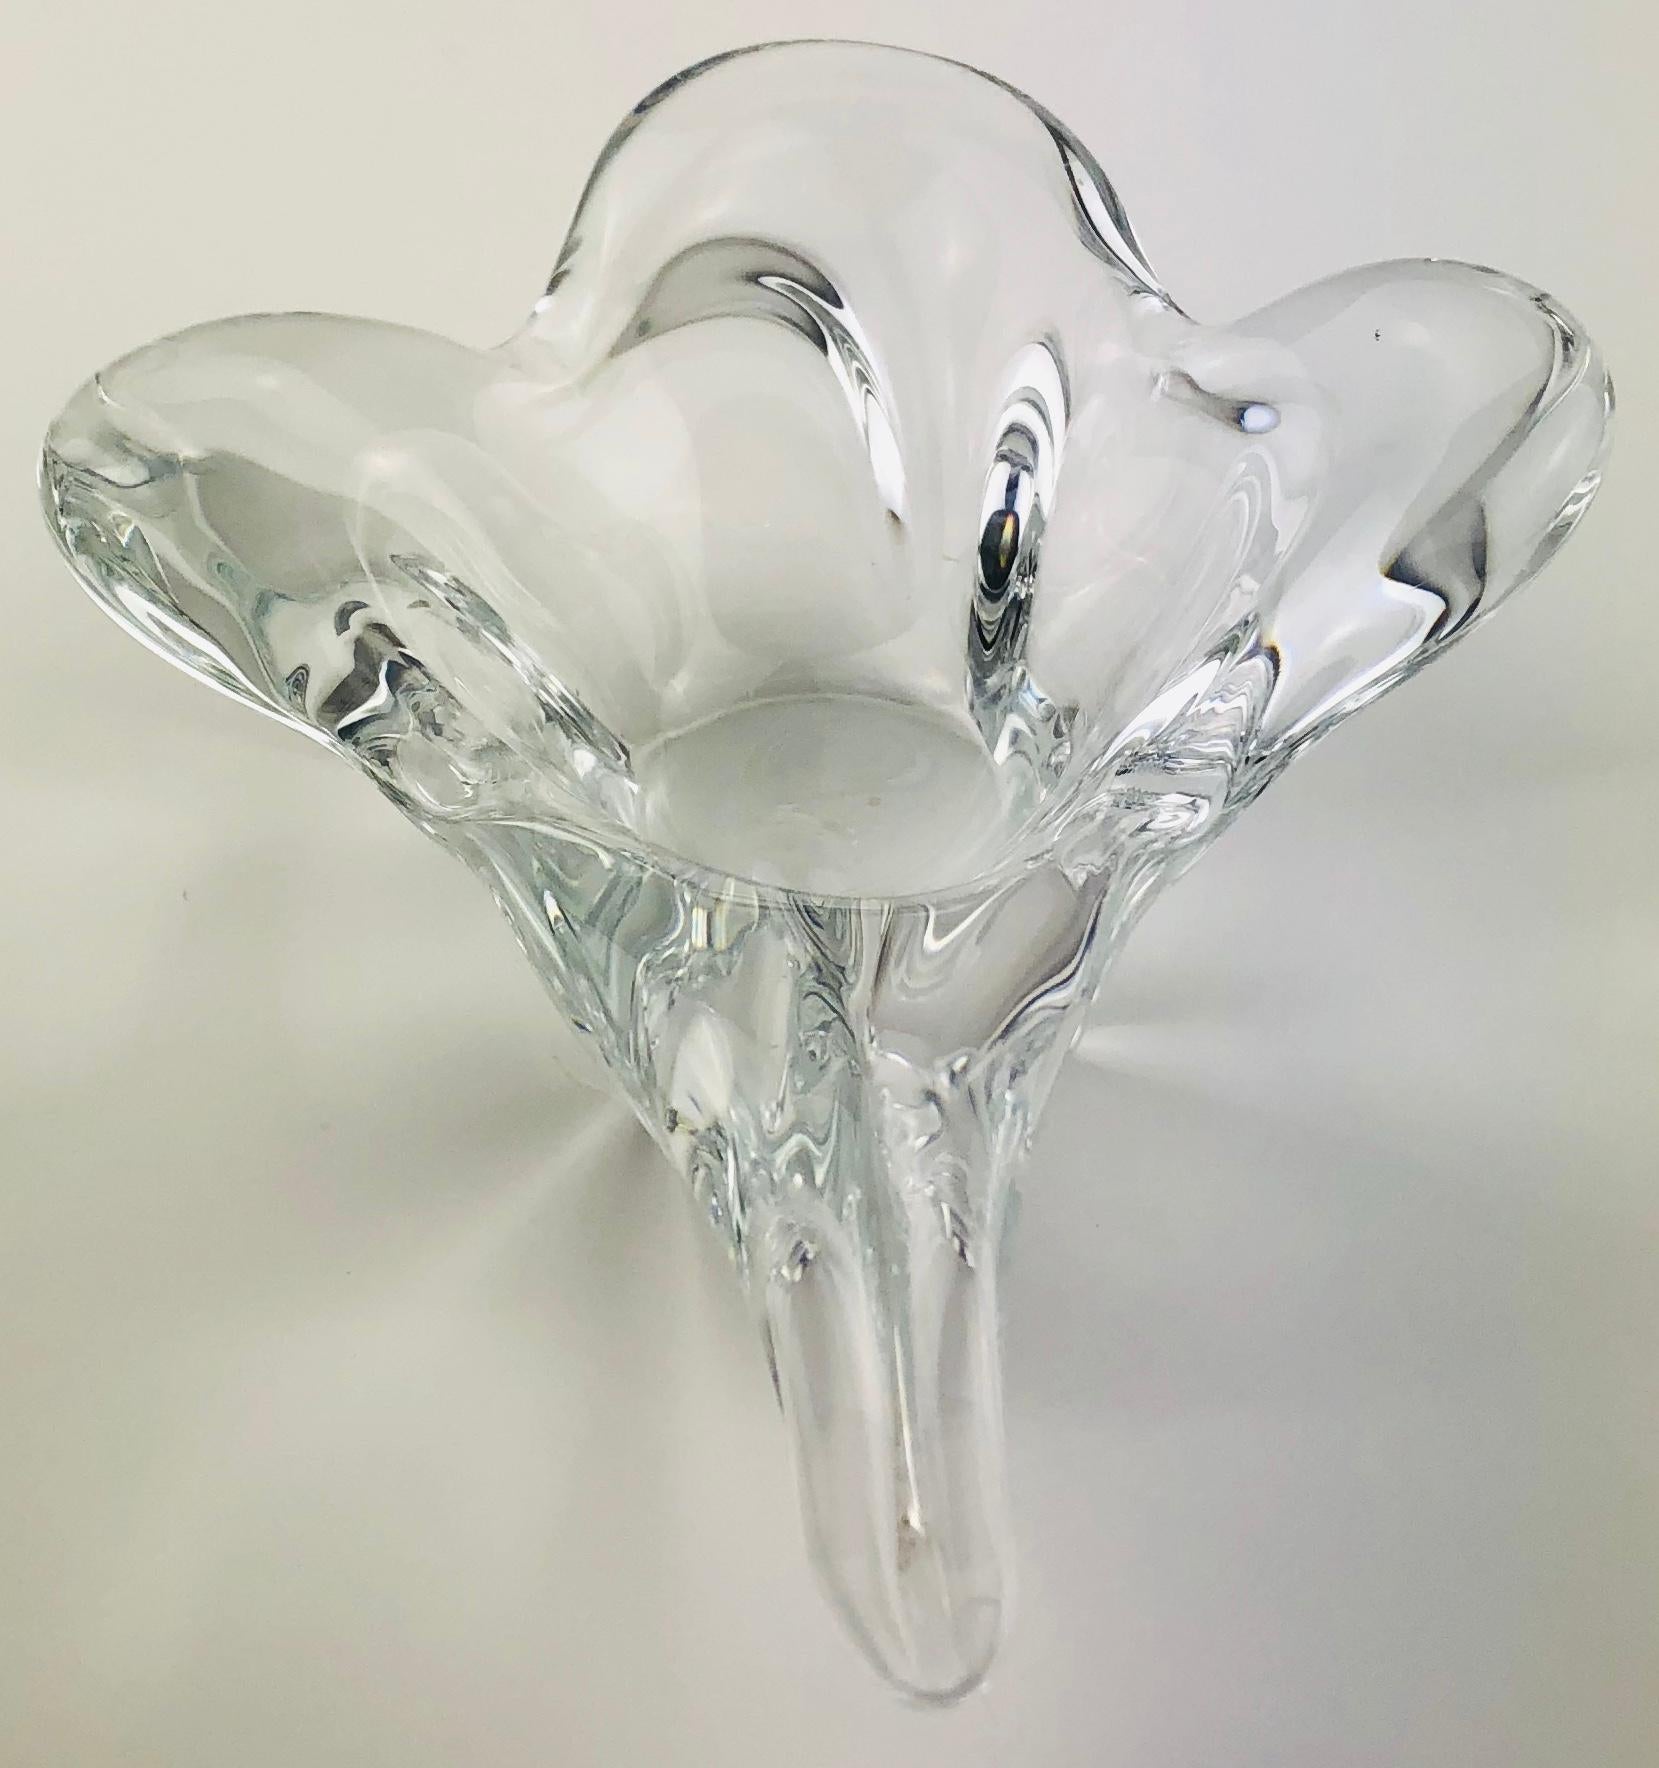 Stunning clear crystal mustard dish or appetizer bowl is stamped Bayet. This well known crystal art house was located in Vannes-Le-Chatel, France.

Beginning in 1963, glassworks at Vannes Le Châtel moved into the production of lead crystal, such as